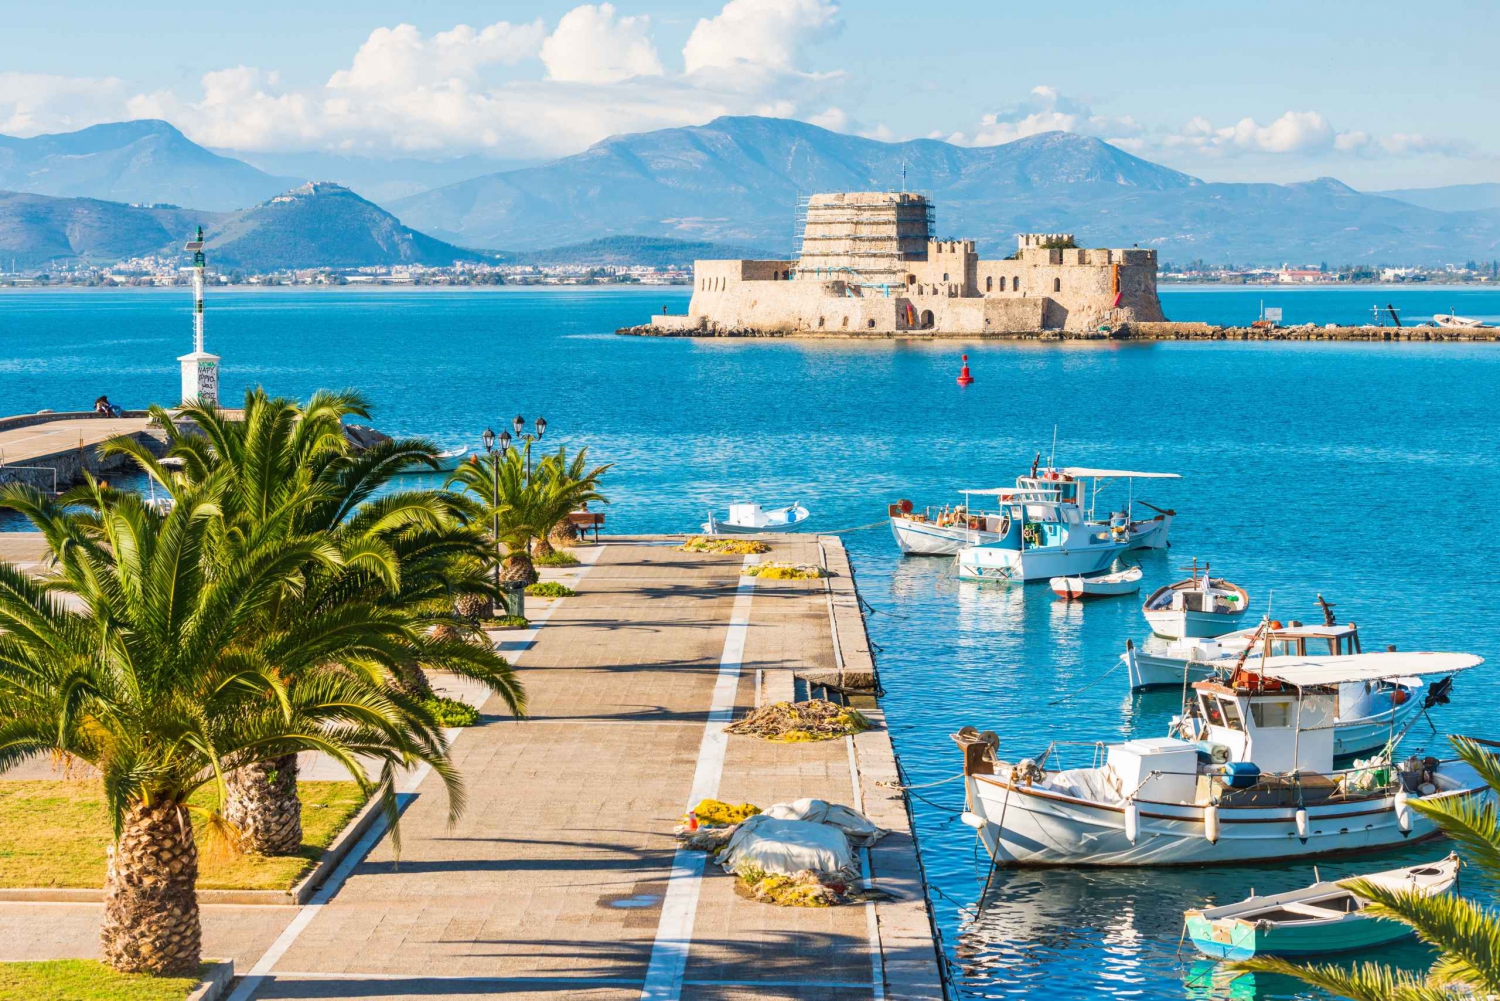 Athens: Peloponnese Highlights Day Trip and V.R. Audio Guide